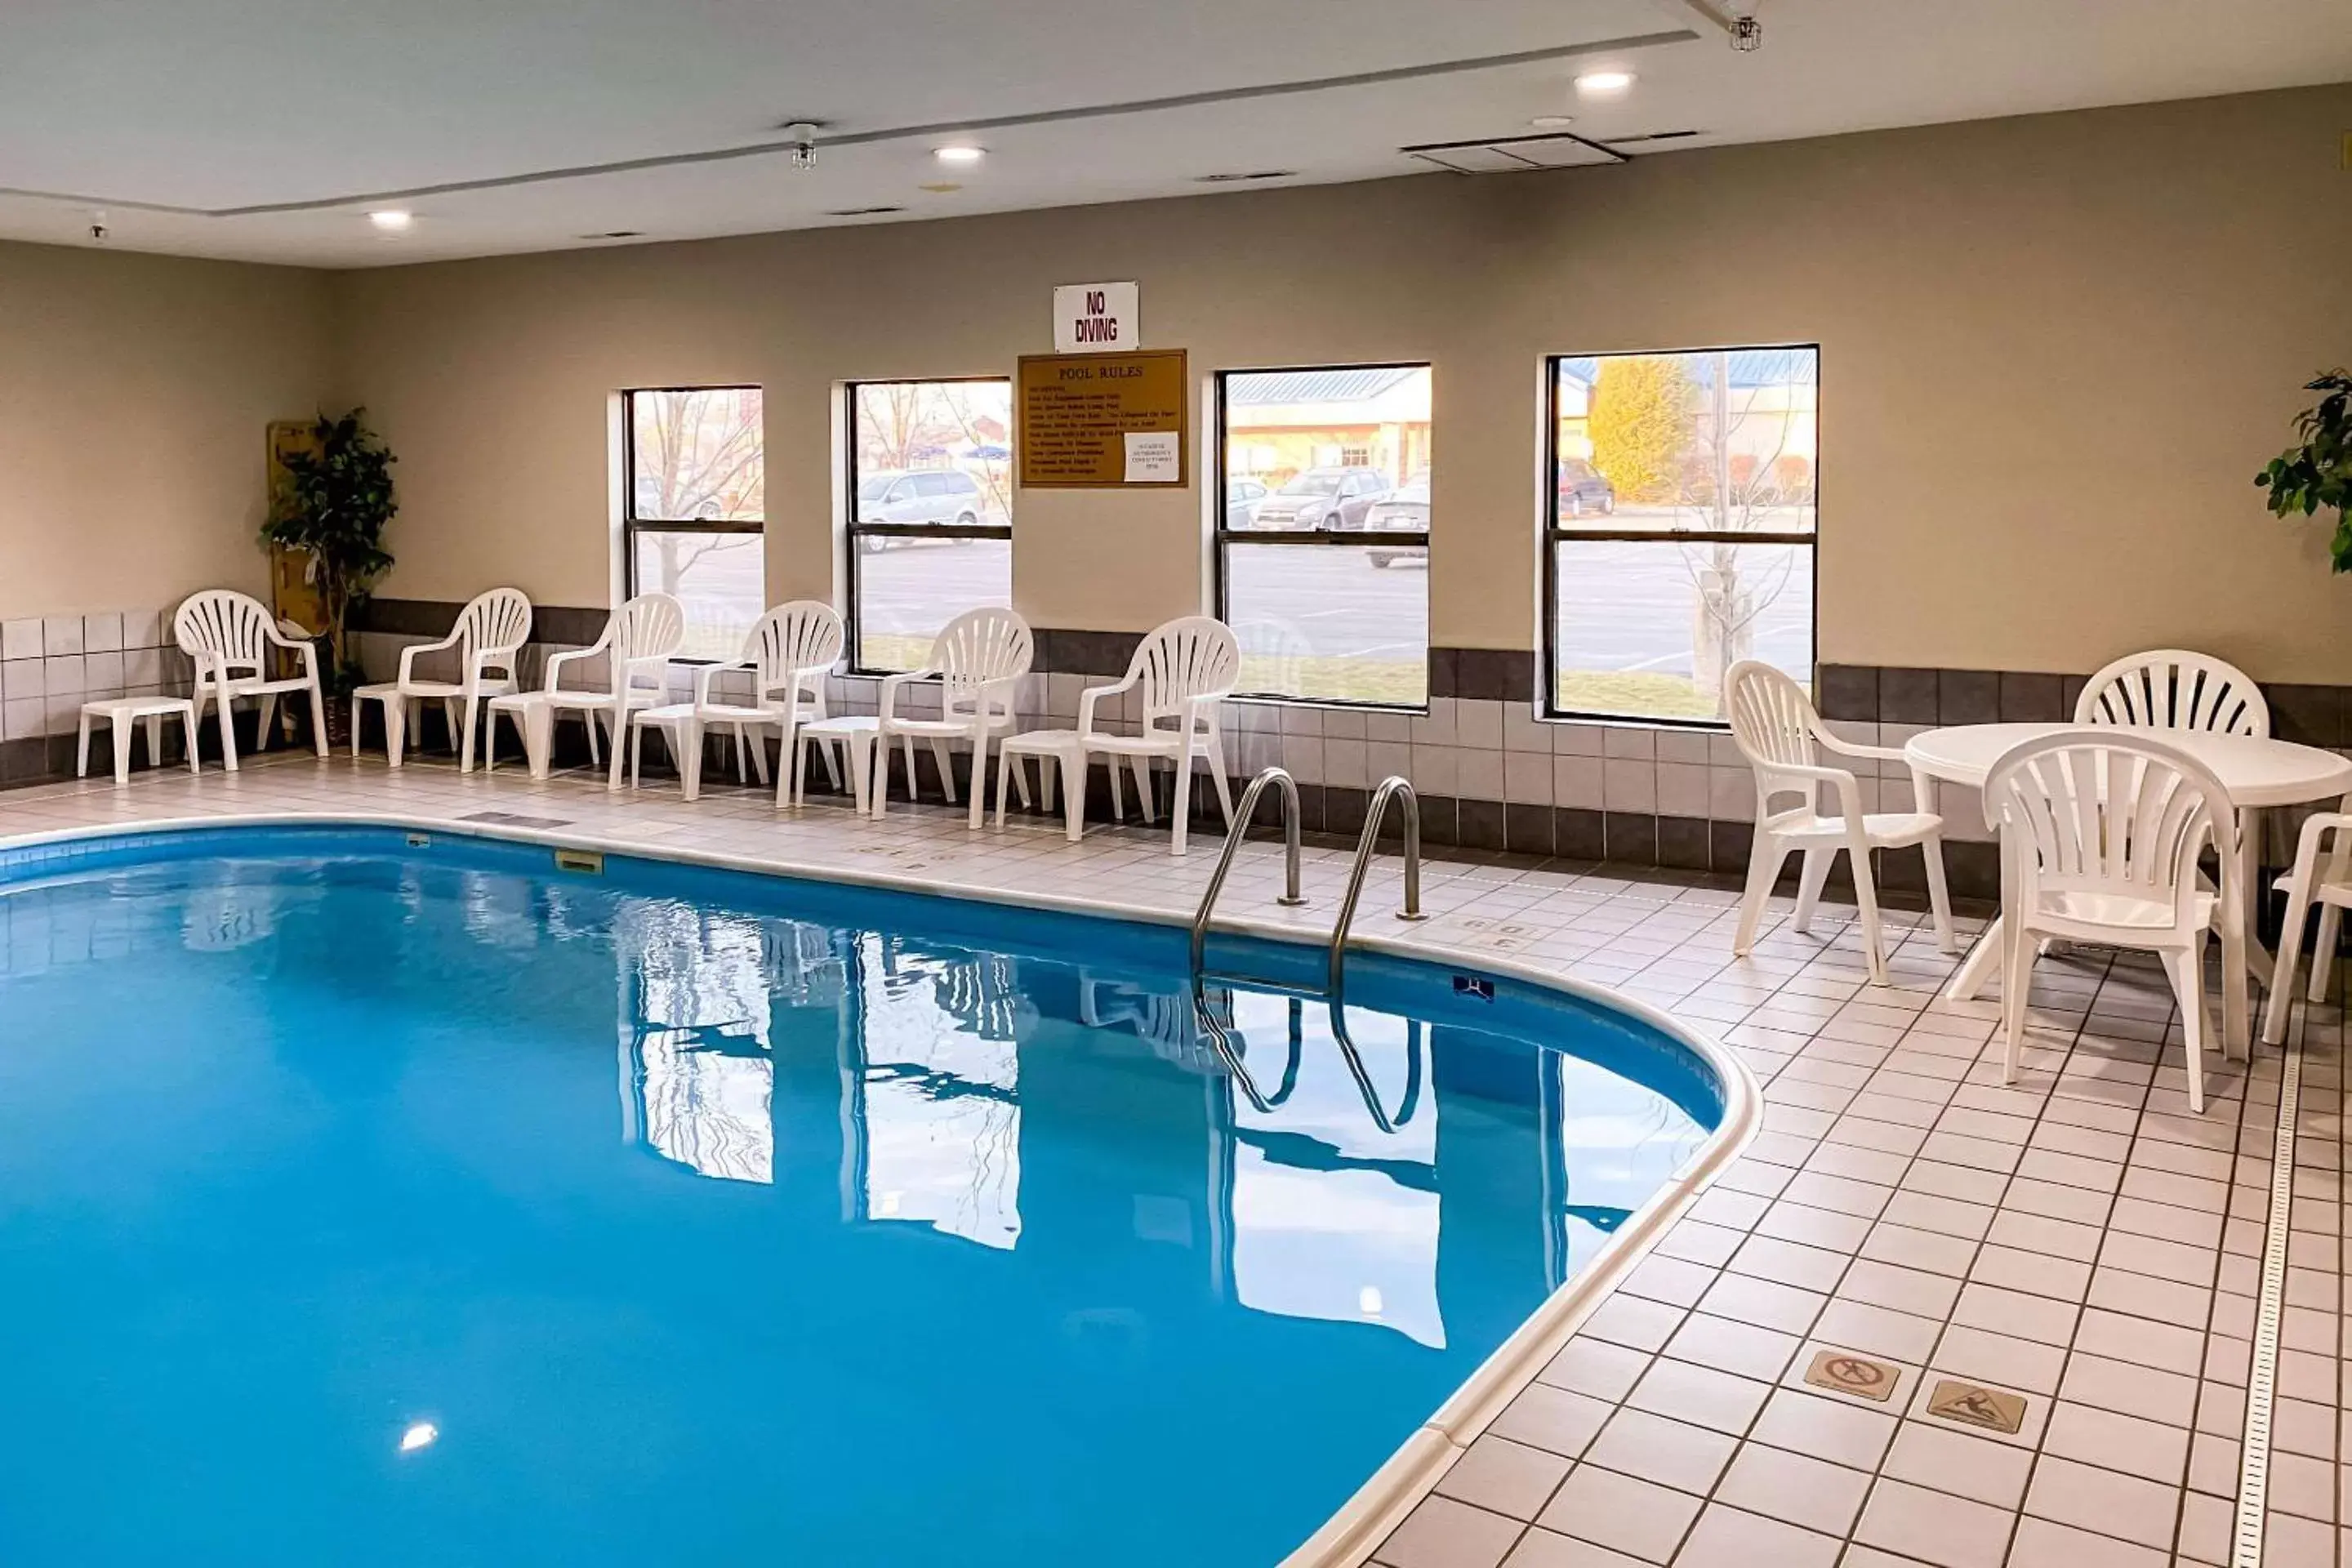 On site, Swimming Pool in Quality Inn - Michigan City, IN